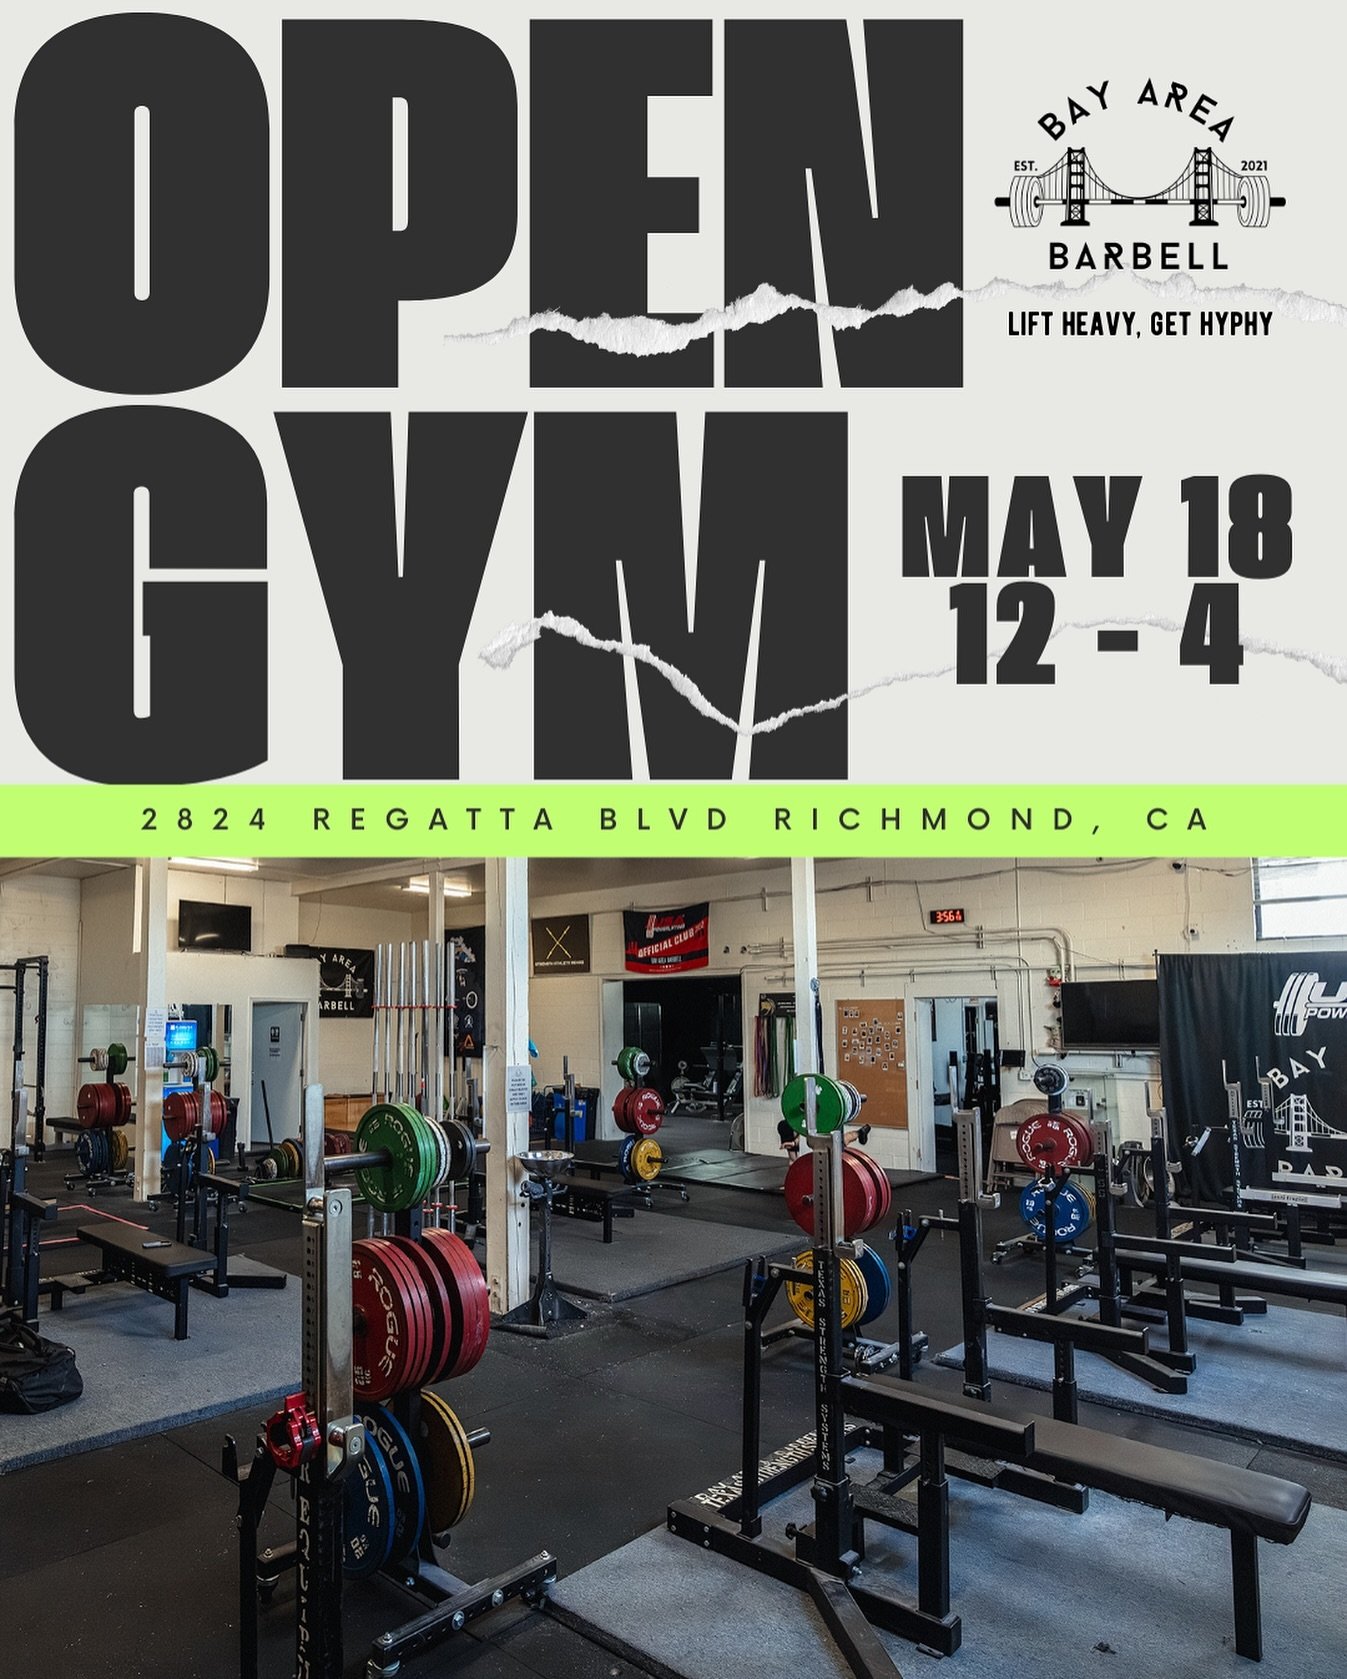 Open gyms at BAB are coming to you new this year!

Slide through to our gym to catch some PRs, a pump before your weekend plans or to check out our space! Send this post to someone you want to check BAB out with because passes are free from 12P -4P! 